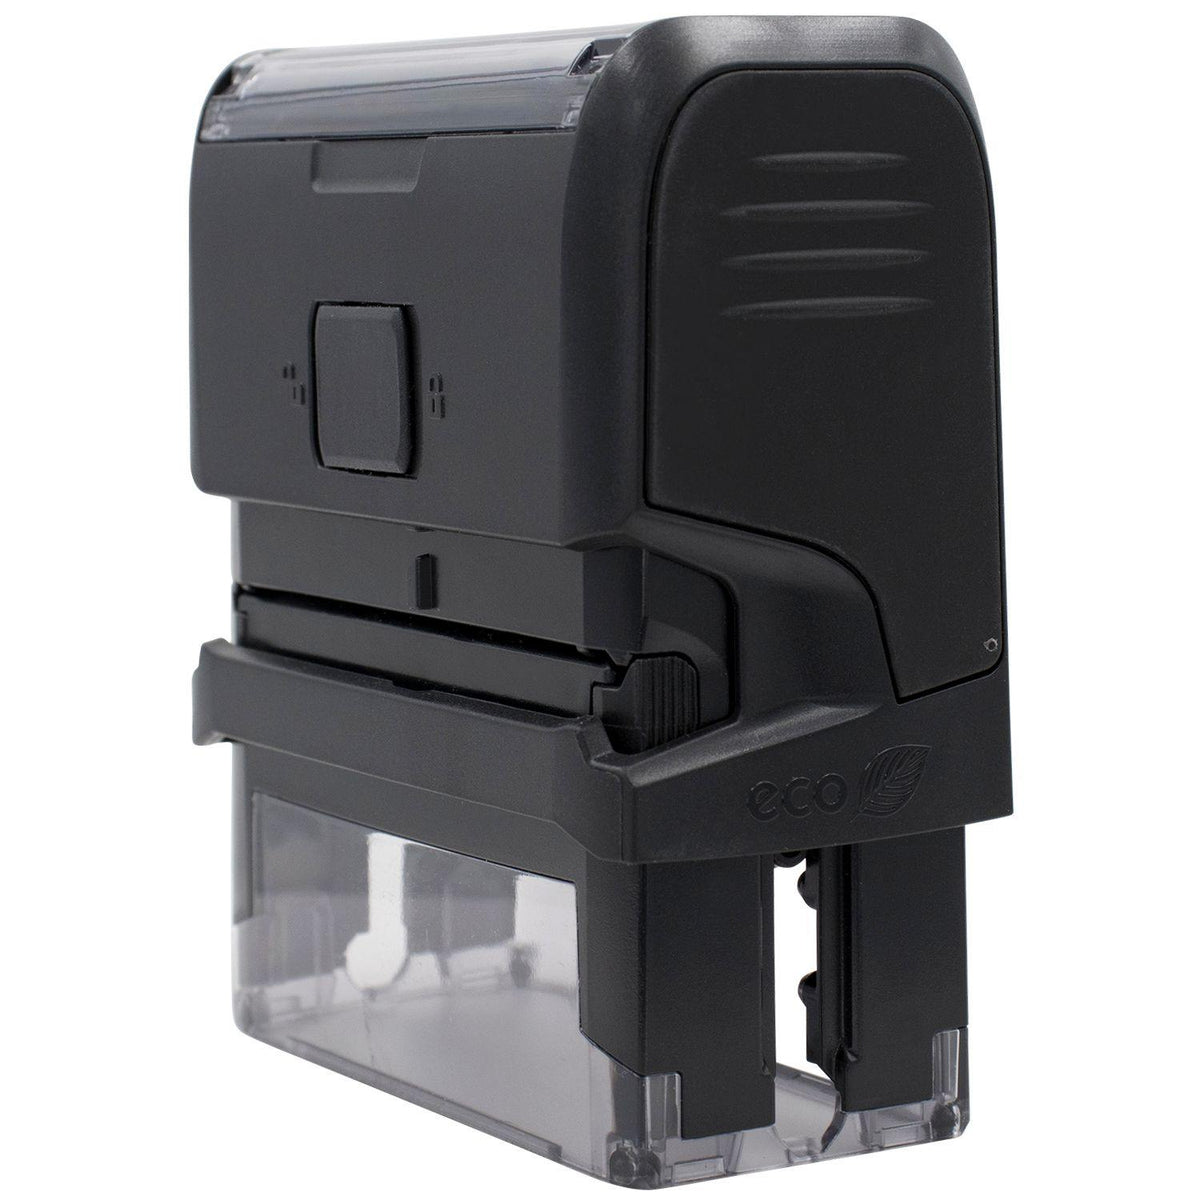 Self Inking Credit Report Stamp - Engineer Seal Stamps - Brand_Trodat, Impression Size_Small, Stamp Type_Self-Inking Stamp, Type of Use_Finance